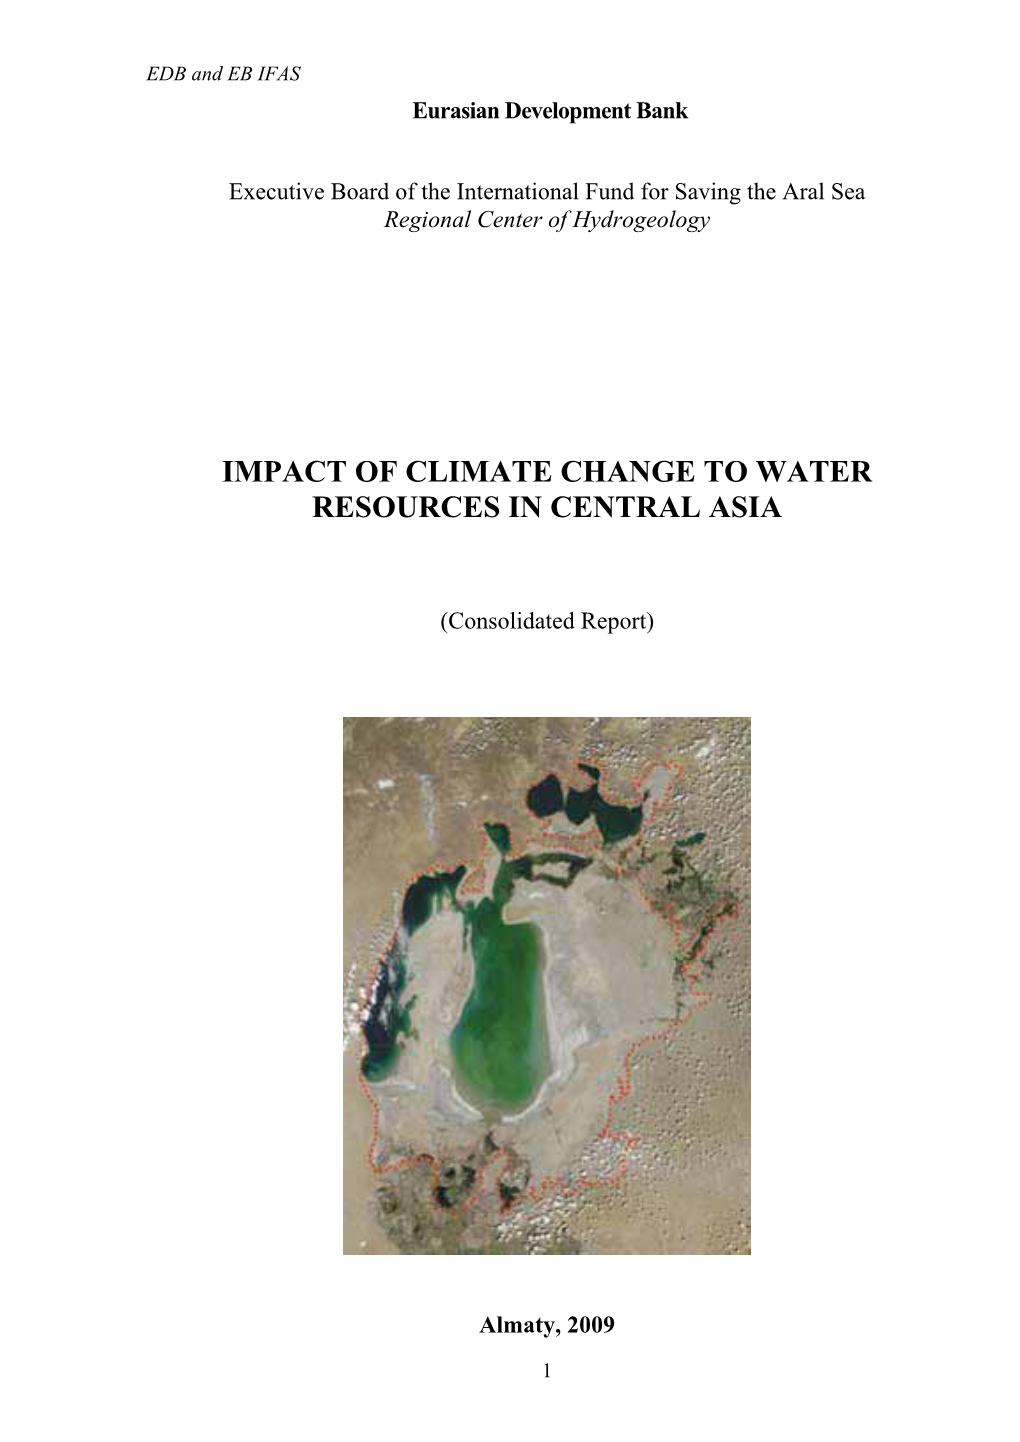 Impact of Climate Change to Water Resources in Central Asia